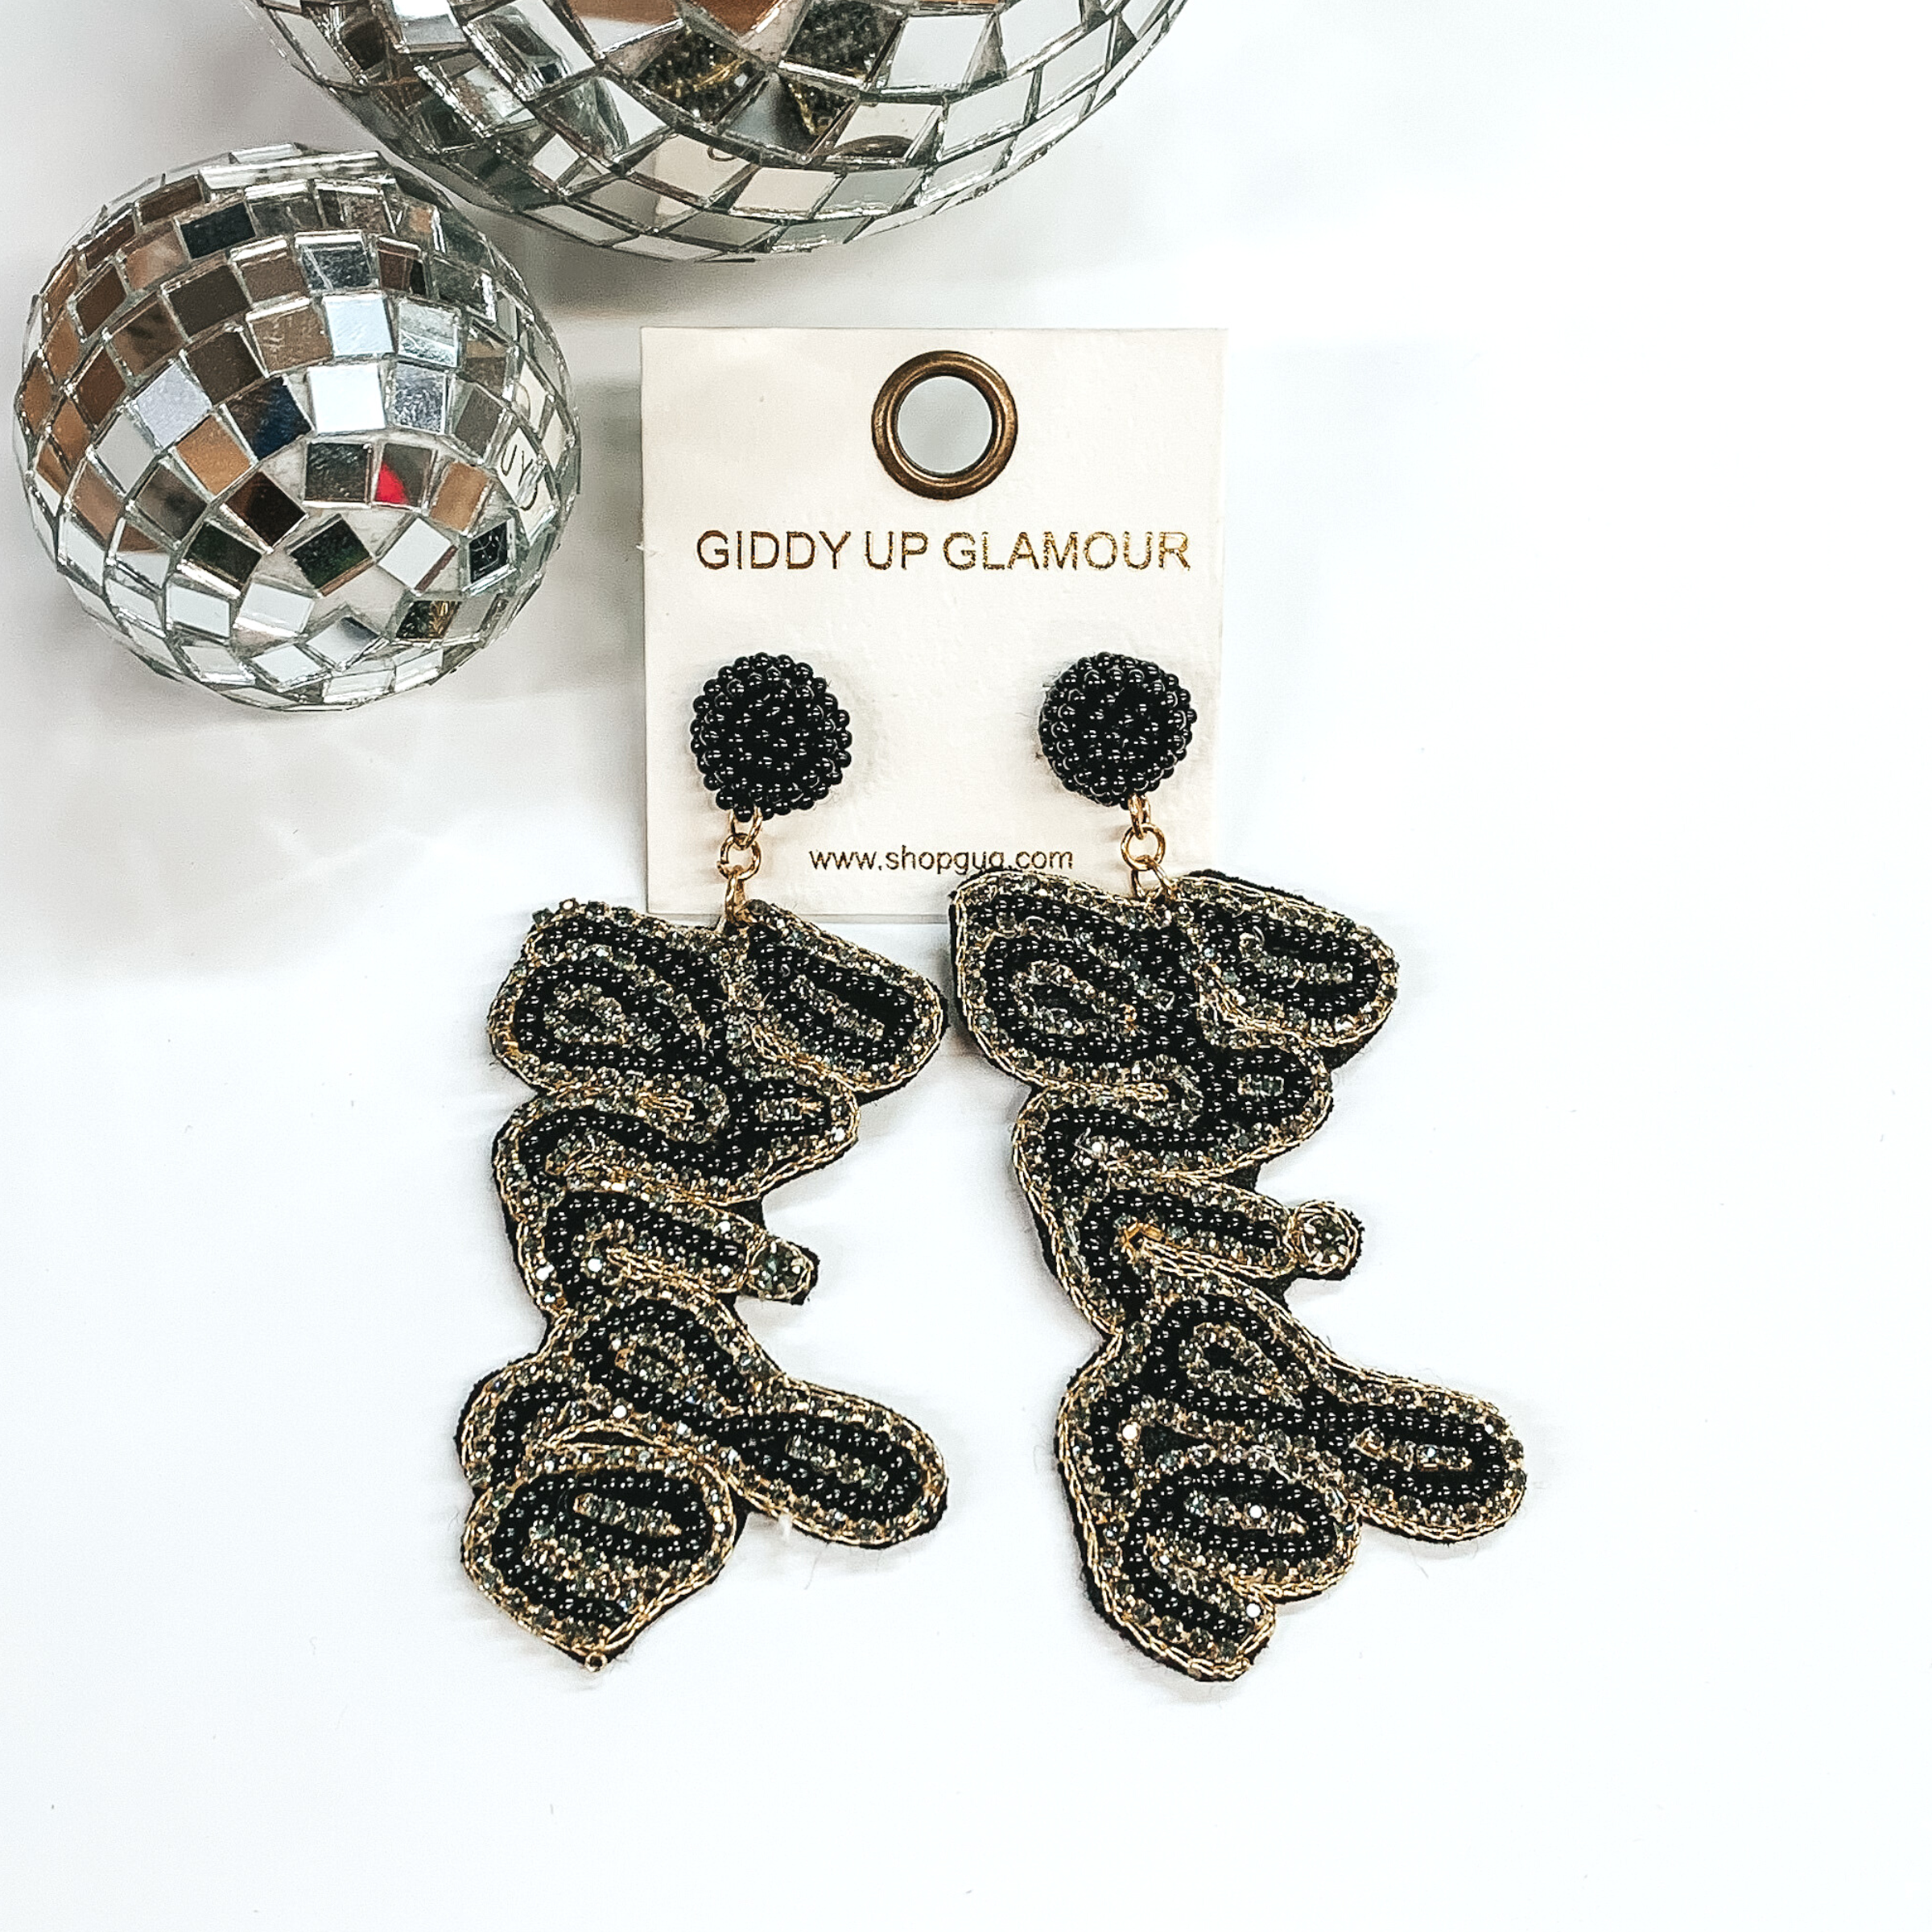 Black circle beaded stud earrings with hanging black beaded pendant that says "bride" that is surrounded by grey crystals. These earrings are pictured on a white background with disco balls in the top left corner. 